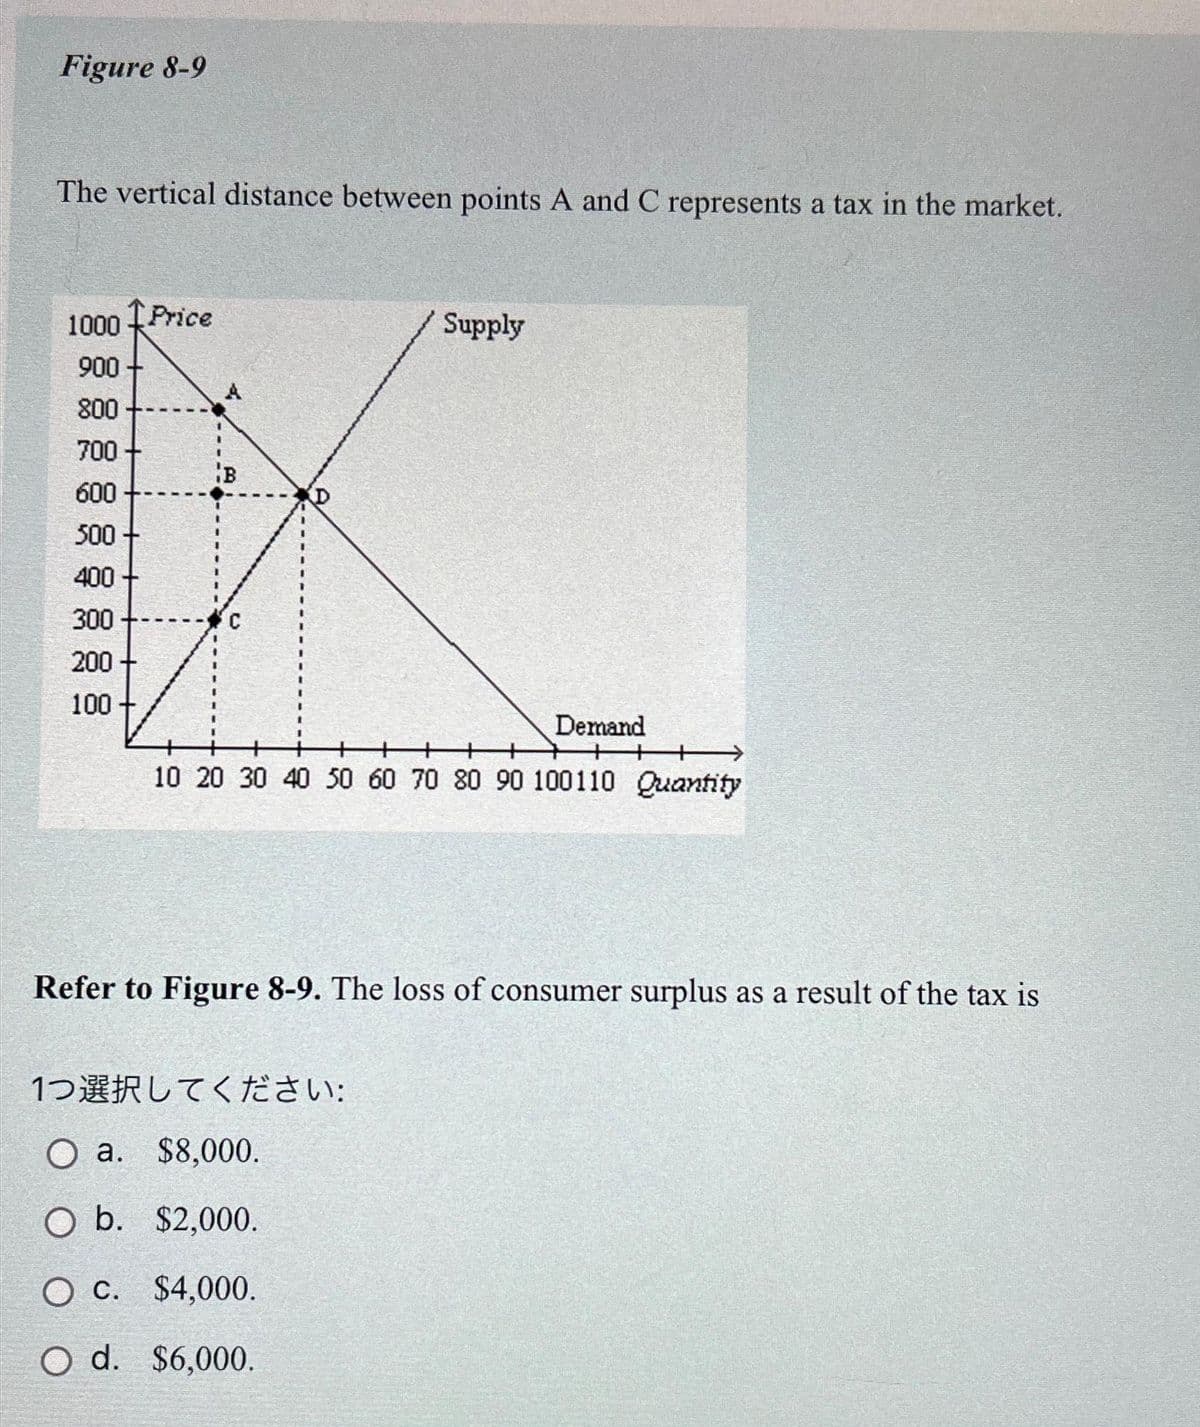 Figure 8-9
The vertical distance between points A and C represents a tax in the market.
1000
900
800
700
600
500
400
300
200
100
1Price
B
Supply
Demand
1つ選択してください:
O a. $8,000.
O b. $2,000.
O c.
$4,000.
O d. $6,000.
+
10 20 30 40 50 60 70 80 90 100110 Quantity
Refer to Figure 8-9. The loss of consumer surplus as a result of the tax is